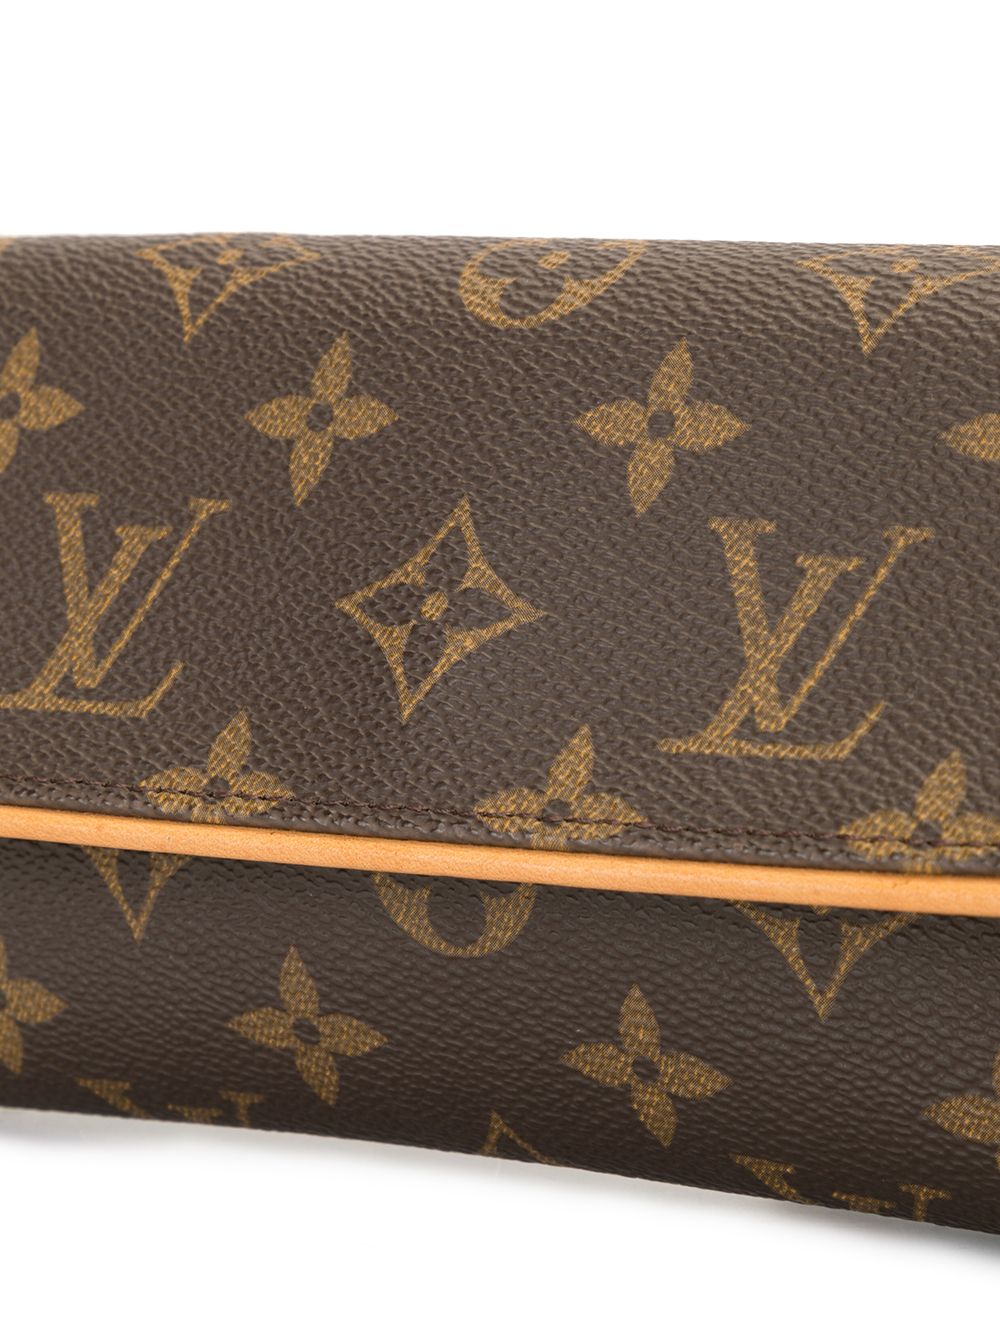 1999 Louis Vuitton - 137 For Sale on 1stDibs